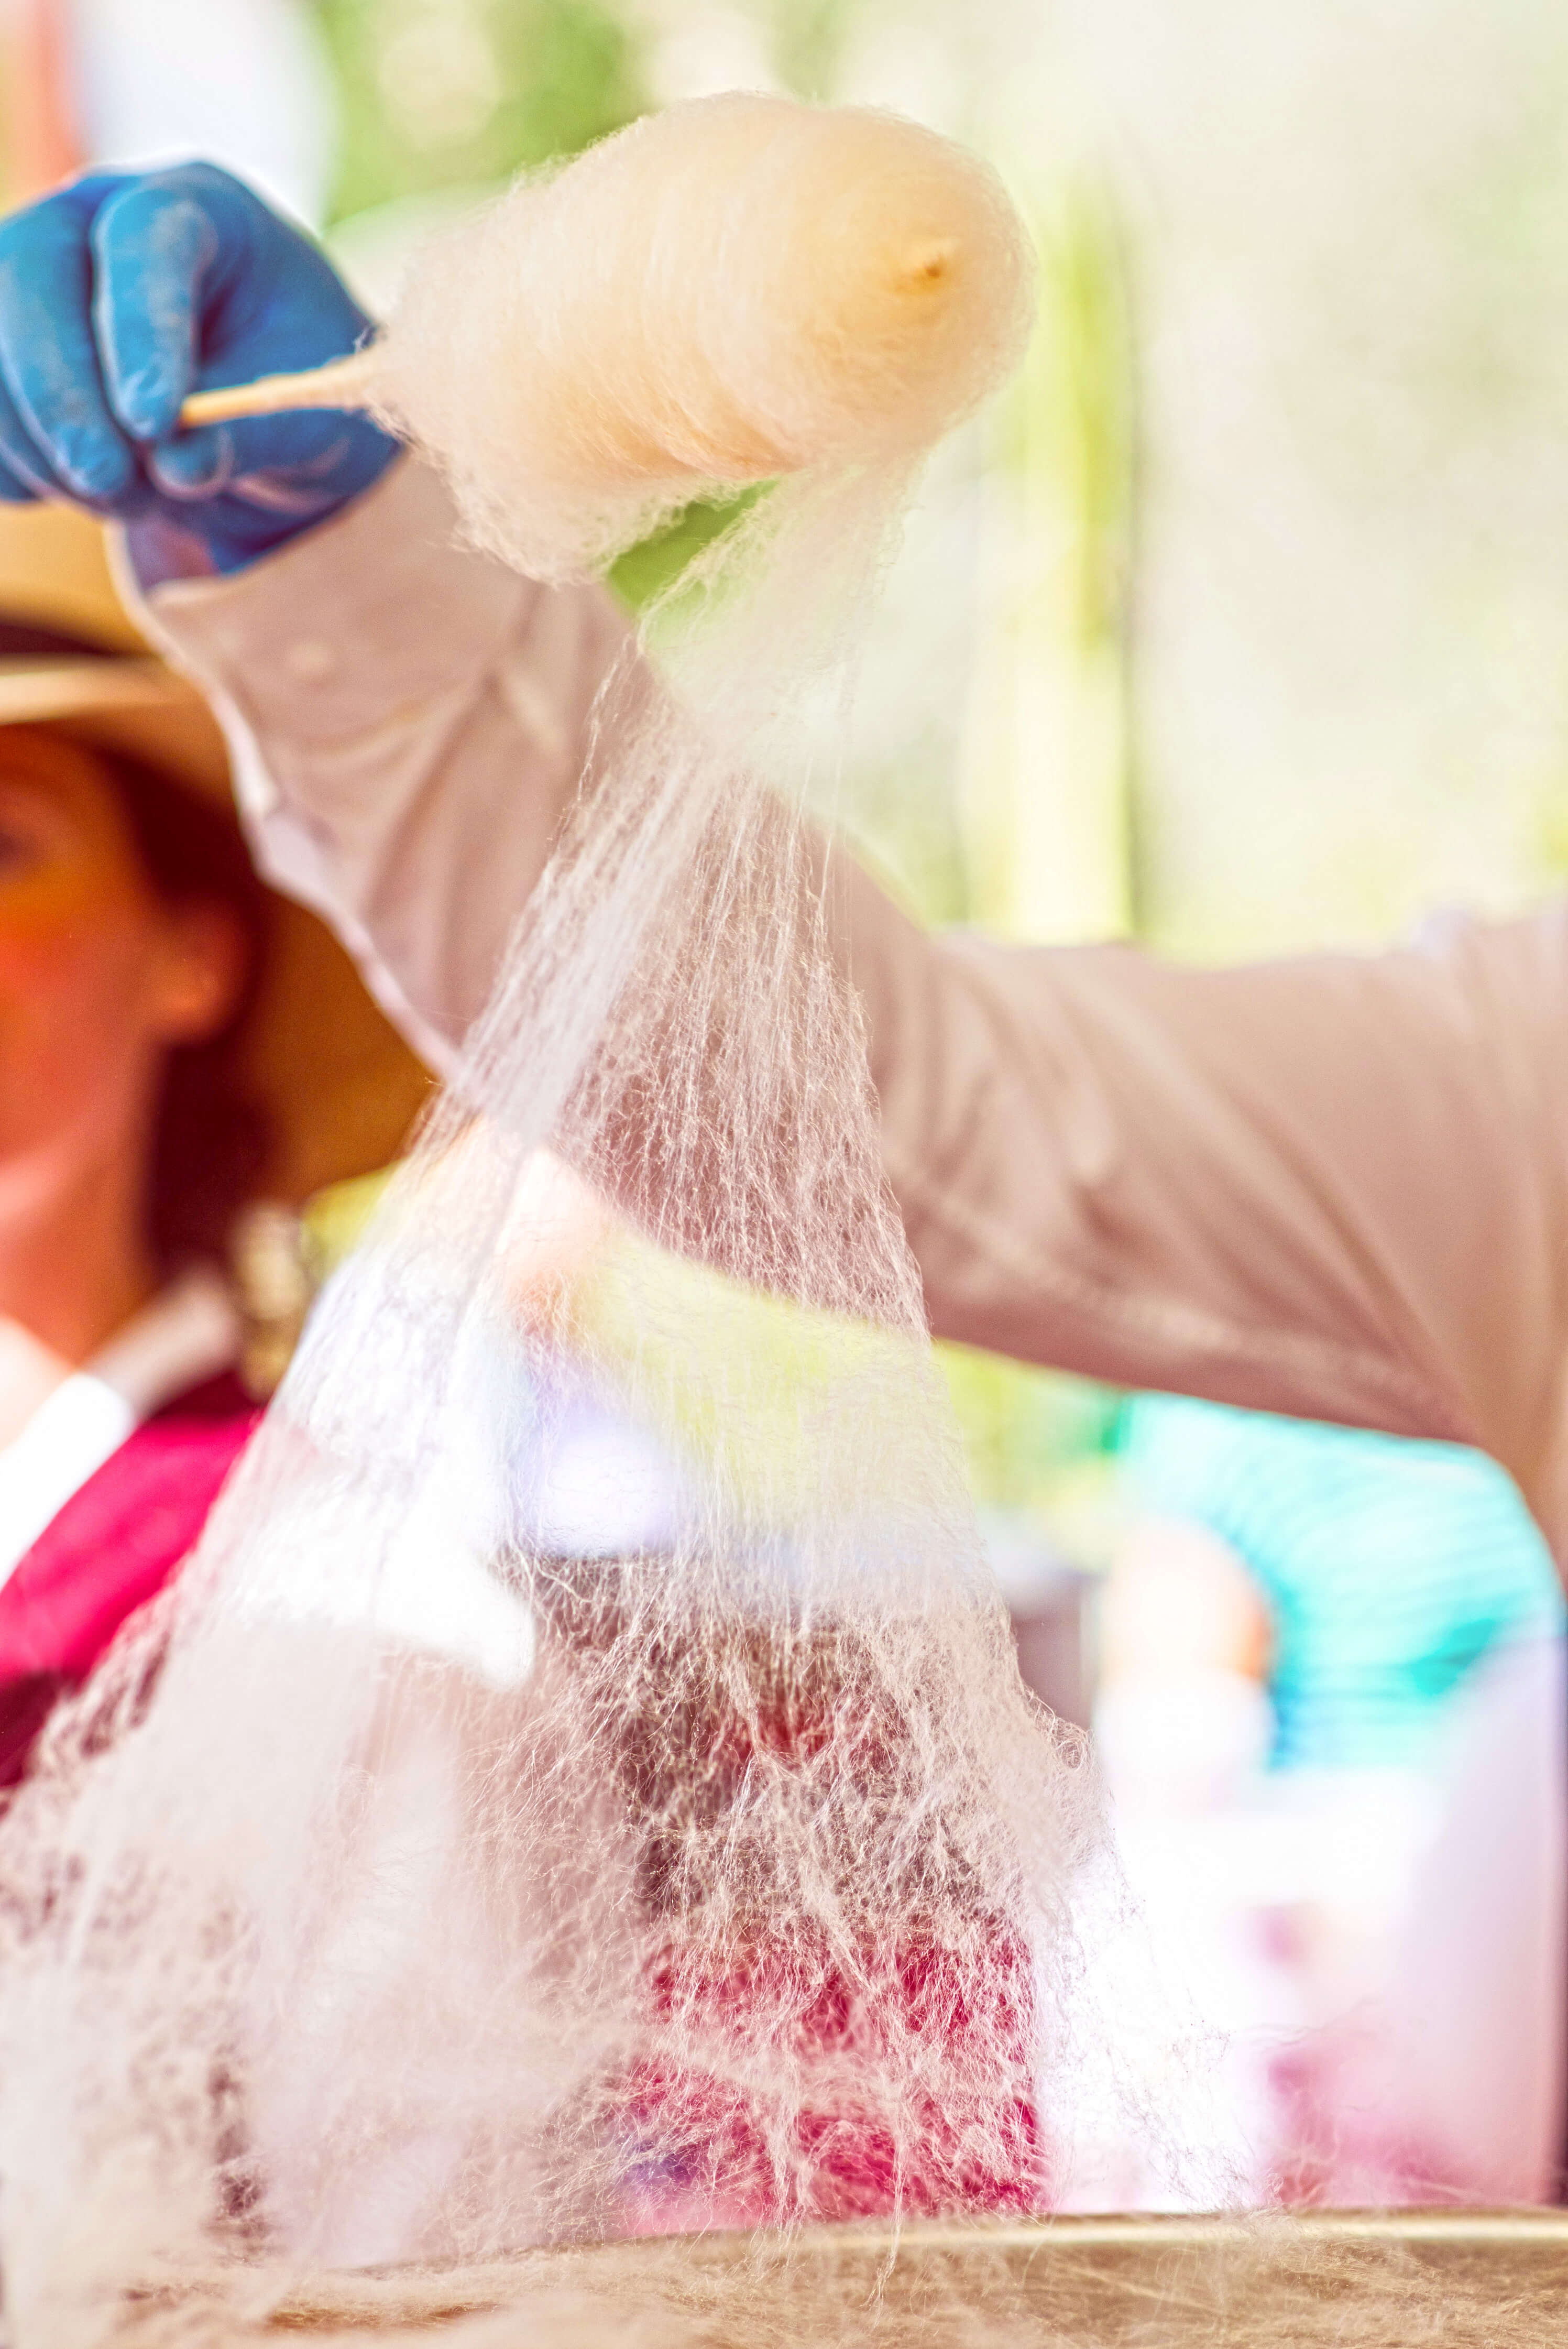 A person pulling cotton candy at the Chiles and Chocolate event at the Desert Botanical Gardens